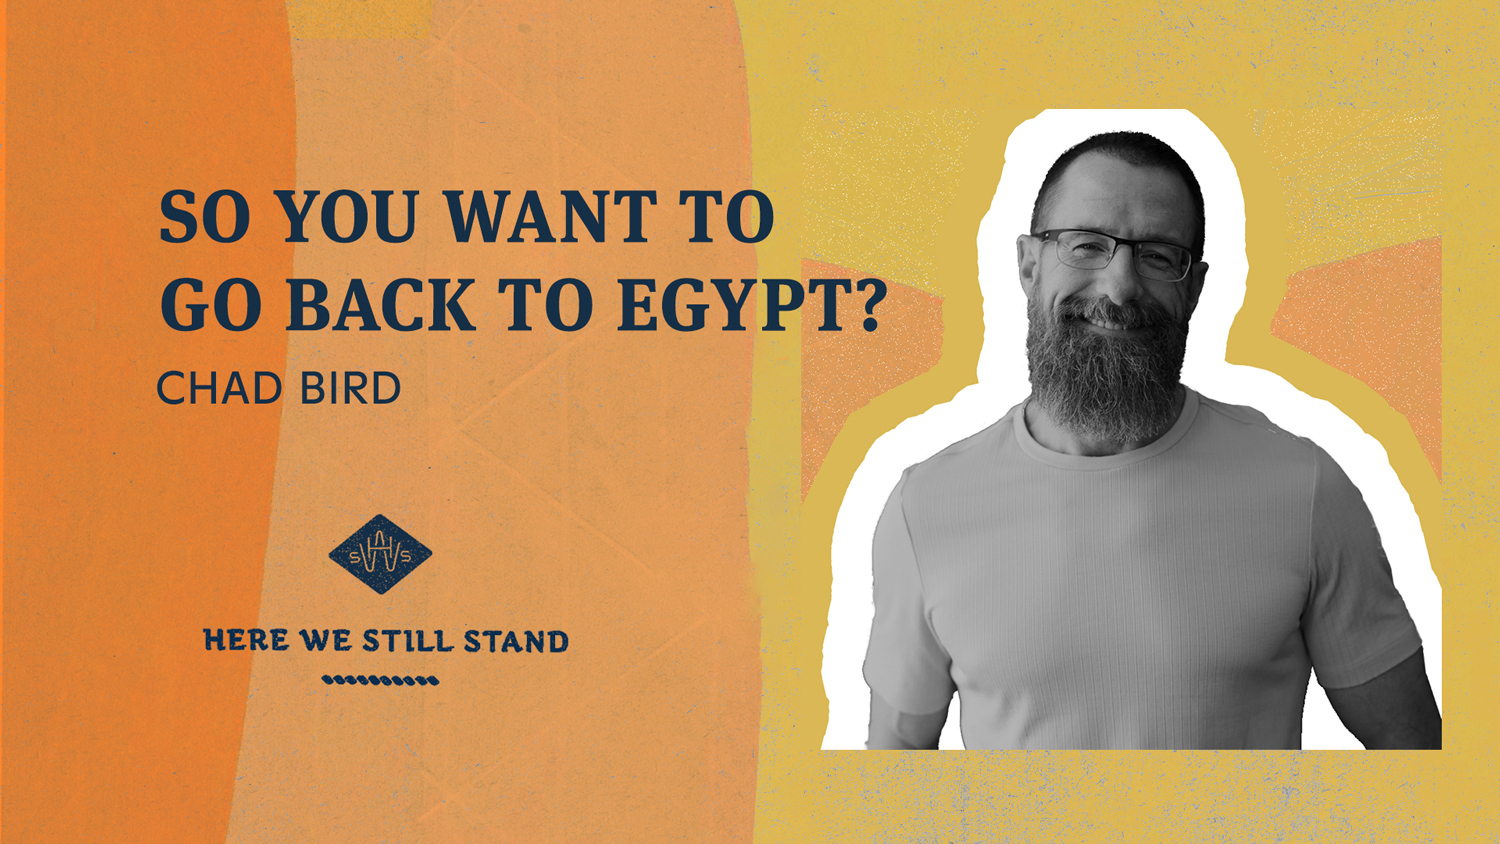 So You Want to Go Back to Egypt?